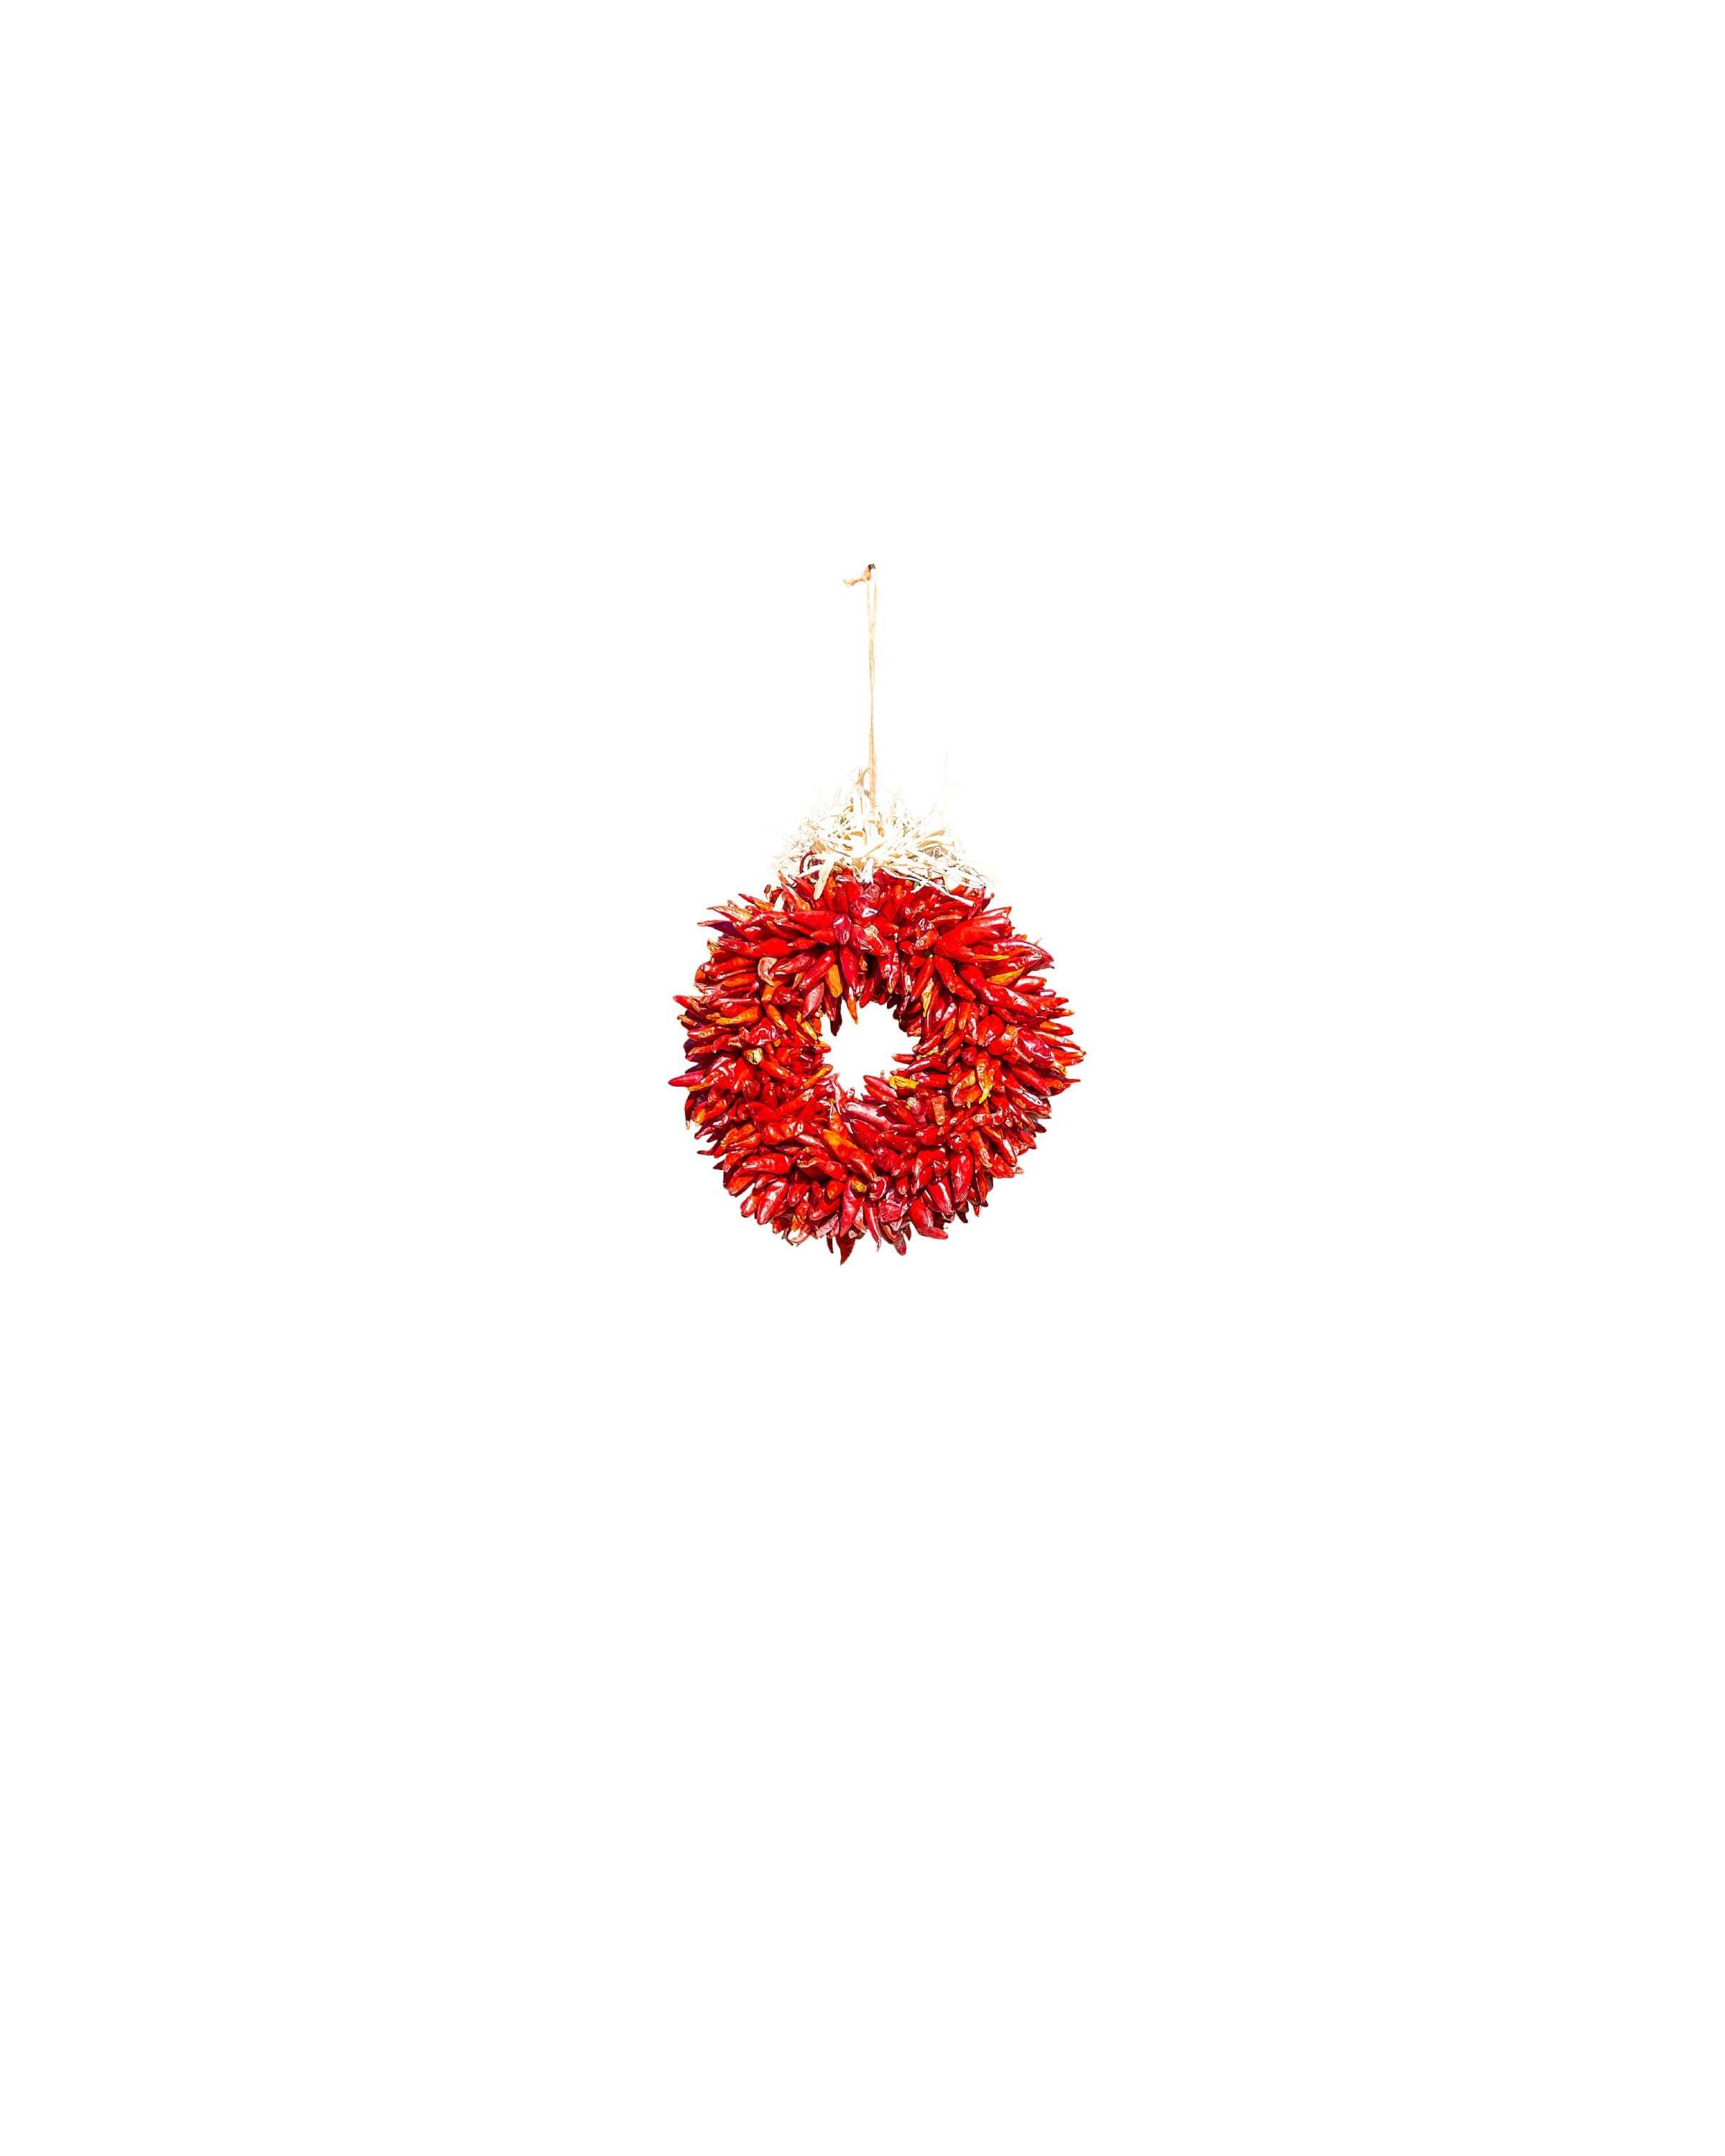 A vibrant red Chile Pequin Wreaths hangs against a white background, adding a festive touch with its circular design and natural texture.